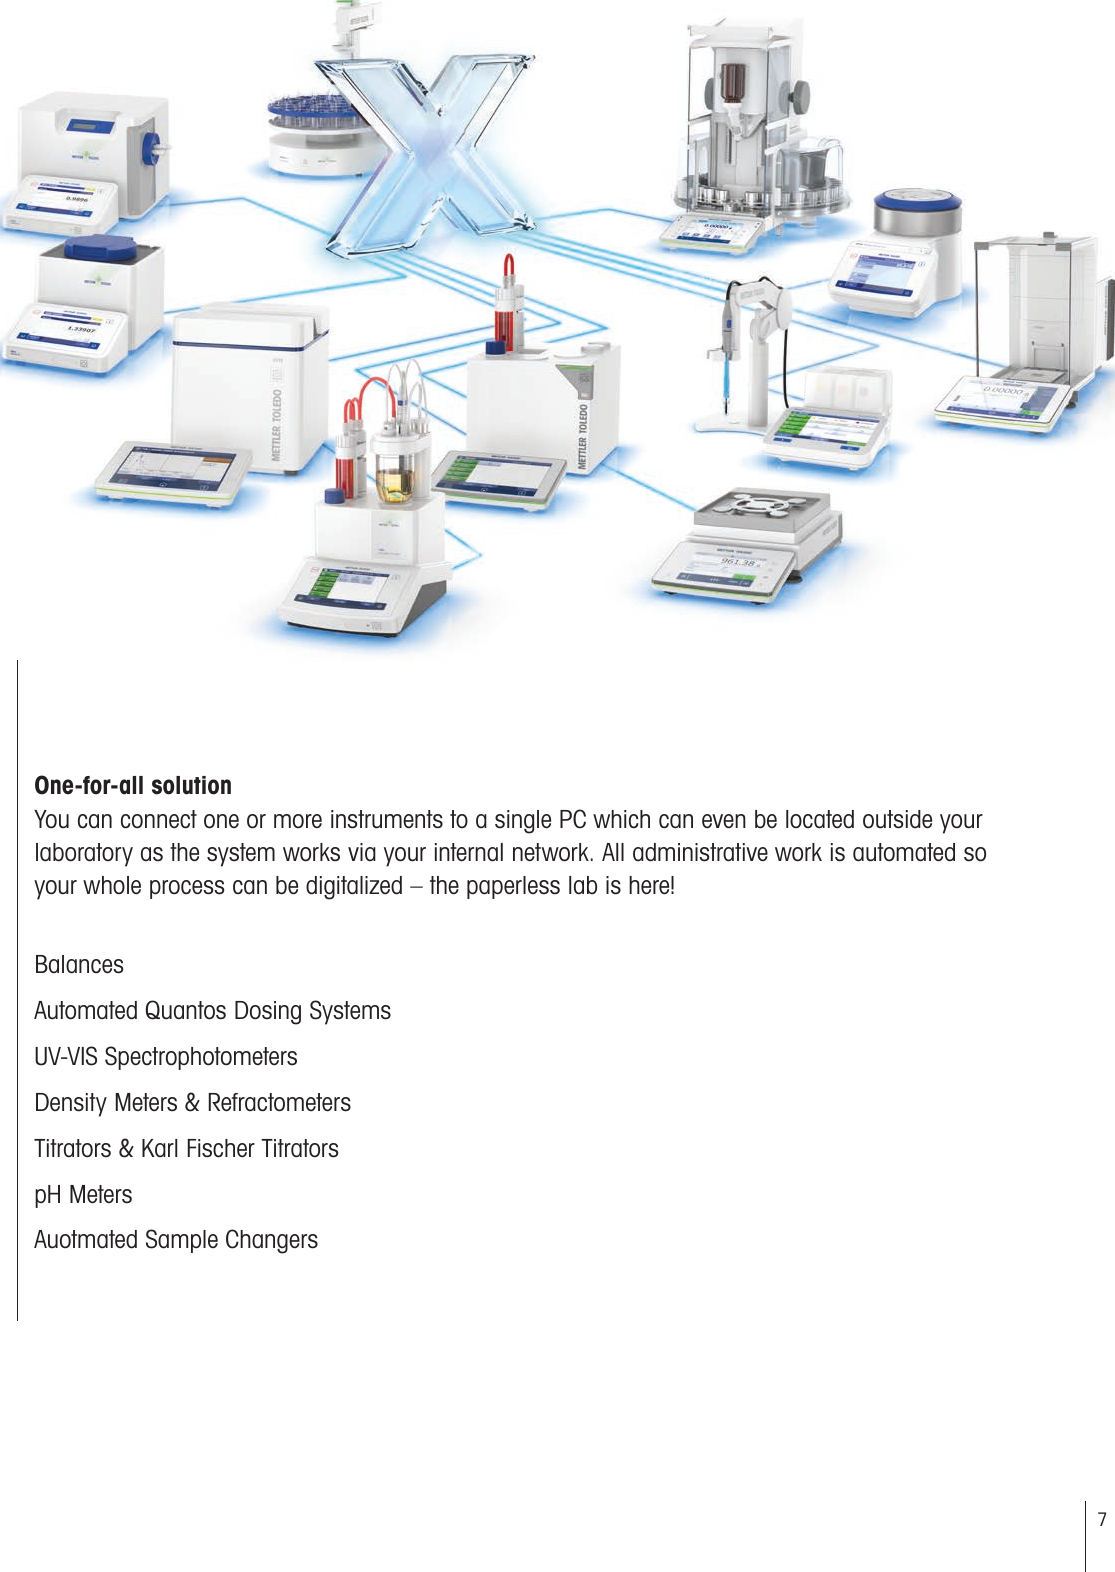 7One-for-all solutionYou can connect one or more instruments to a single PC which can even be located outside your laboratory as the system works via your internal network. All administrative work is automated so yourwhole process can be digitalized – the paperless lab is here!BalancesAutomated Quantos Dosing SystemsUV-VIS SpectrophotometersDensity Meters &amp; RefractometersTitrators &amp; Karl Fischer TitratorspH MetersAuotmated Sample Changers